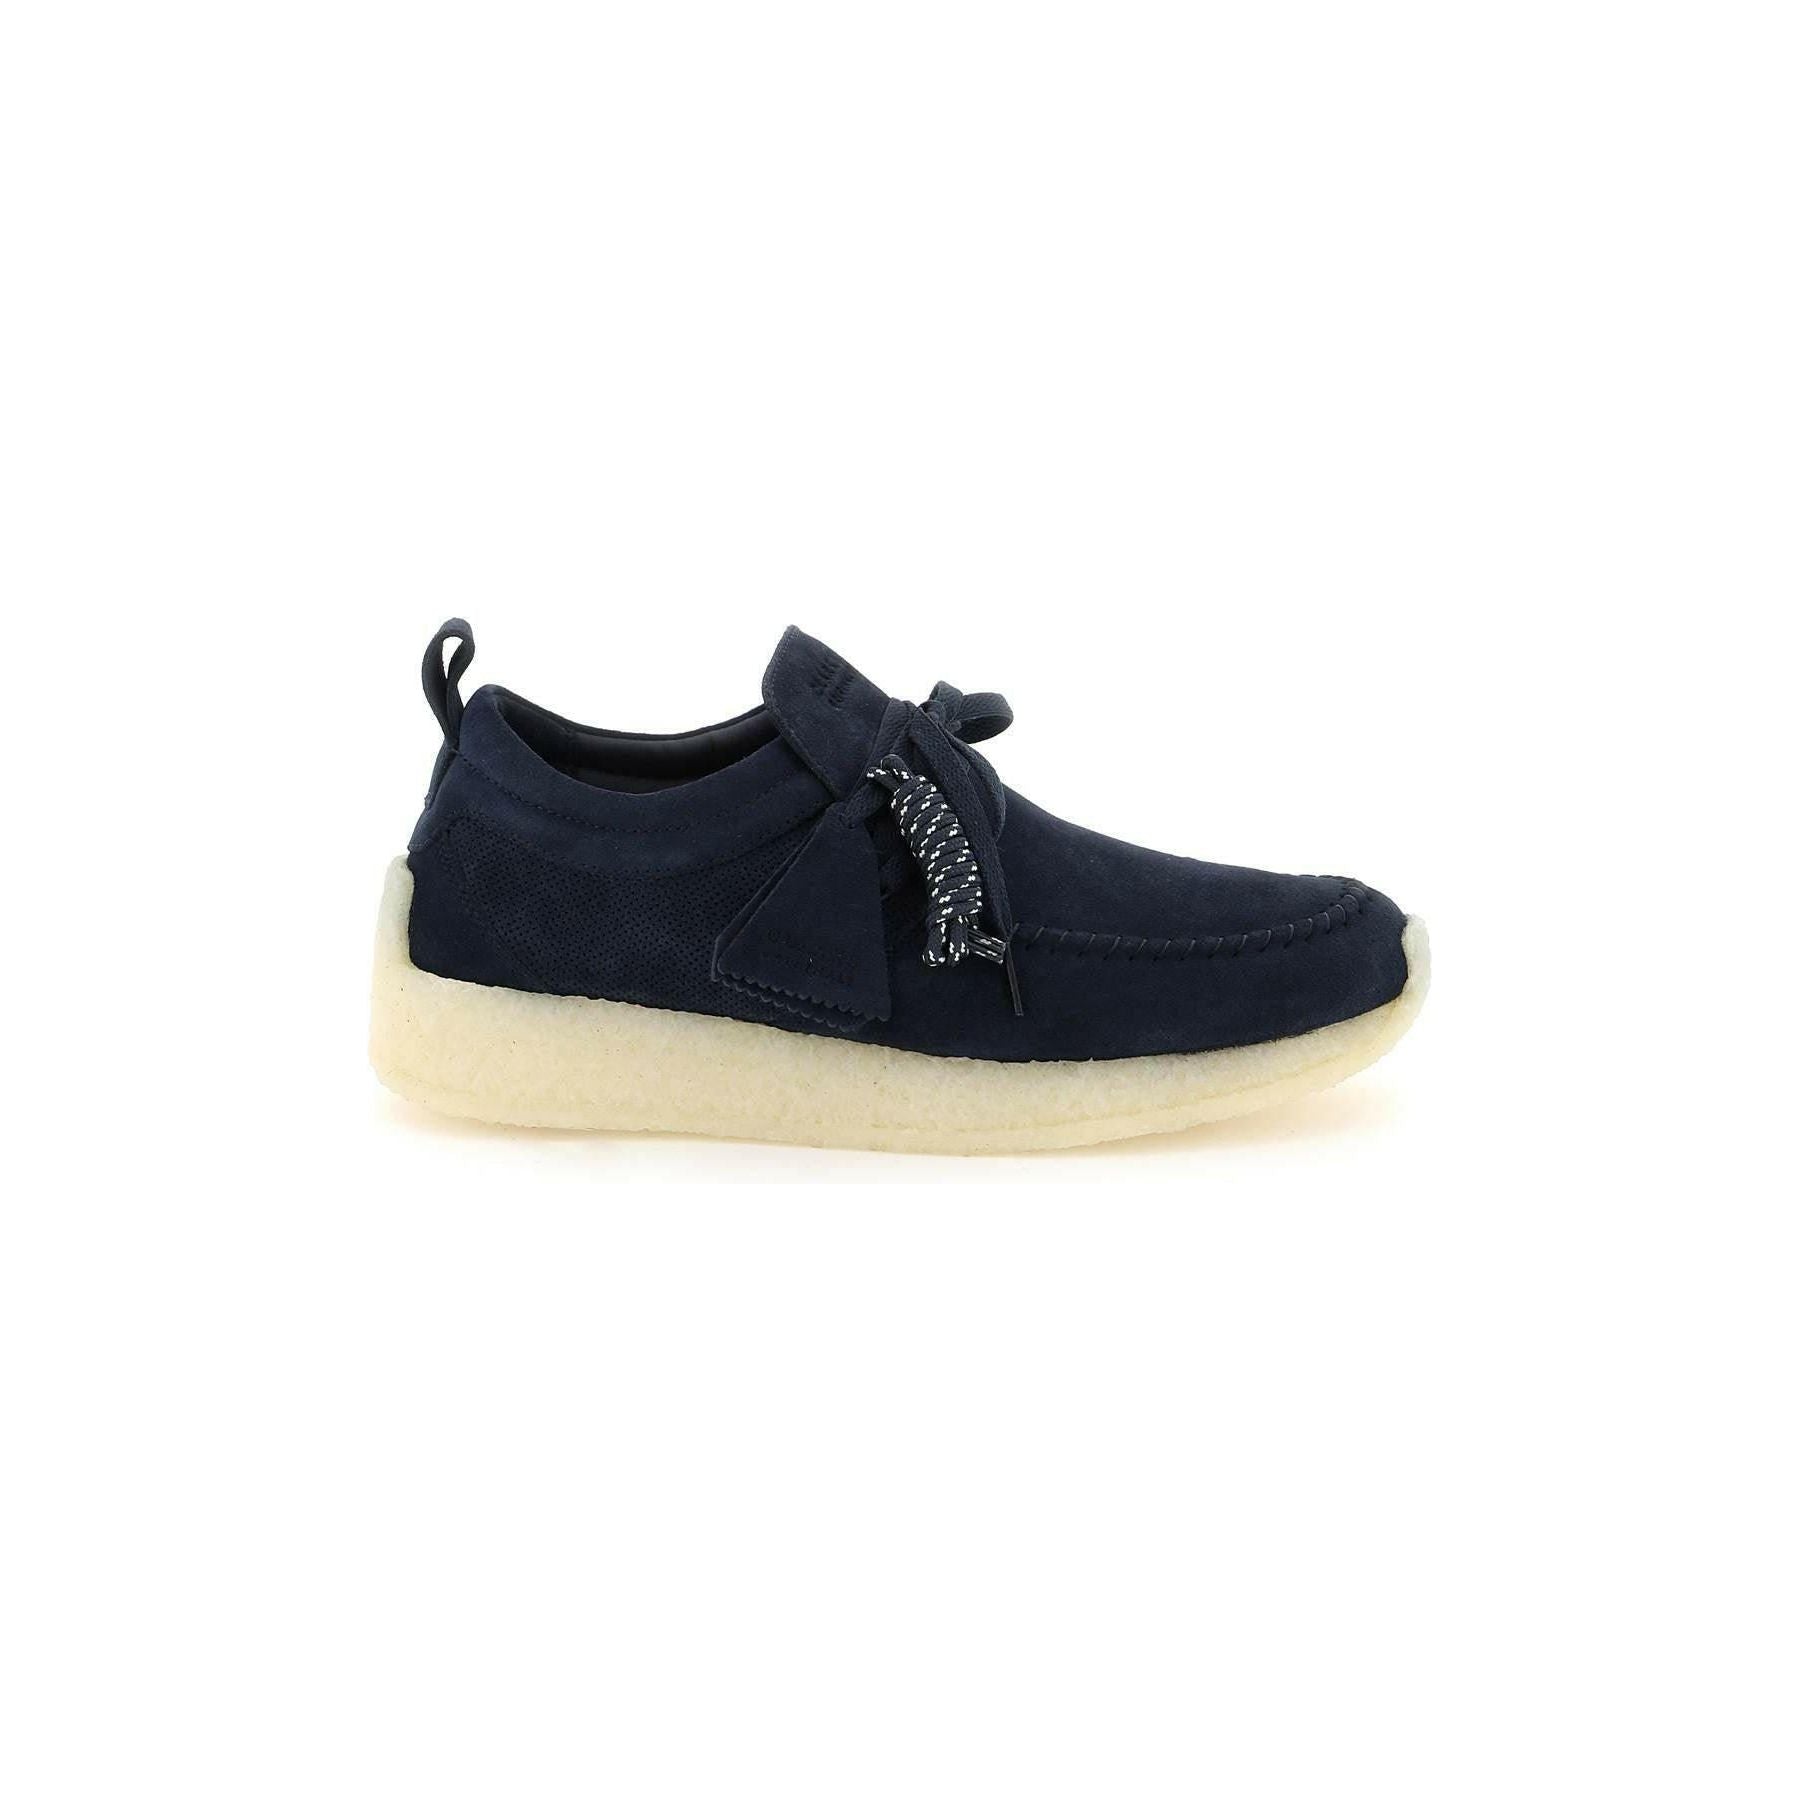 Ronnie Fieg X Clarks 'Maycliffe' Lace Up Shoes RONNIE FIEG X CLARKS JOHN JULIA.